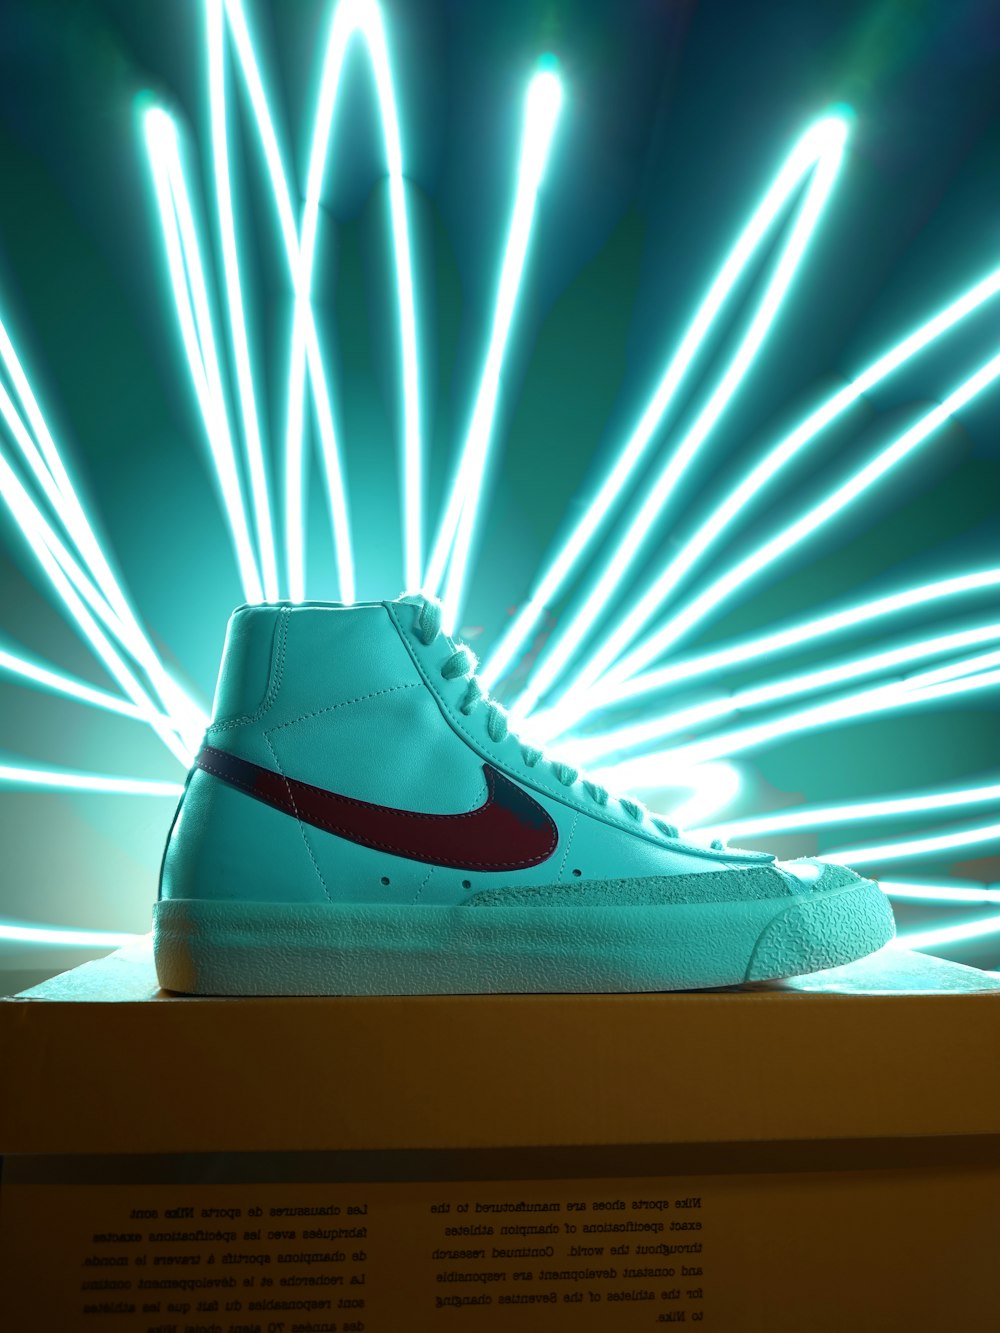 a pair of sneakers with a light show in the background